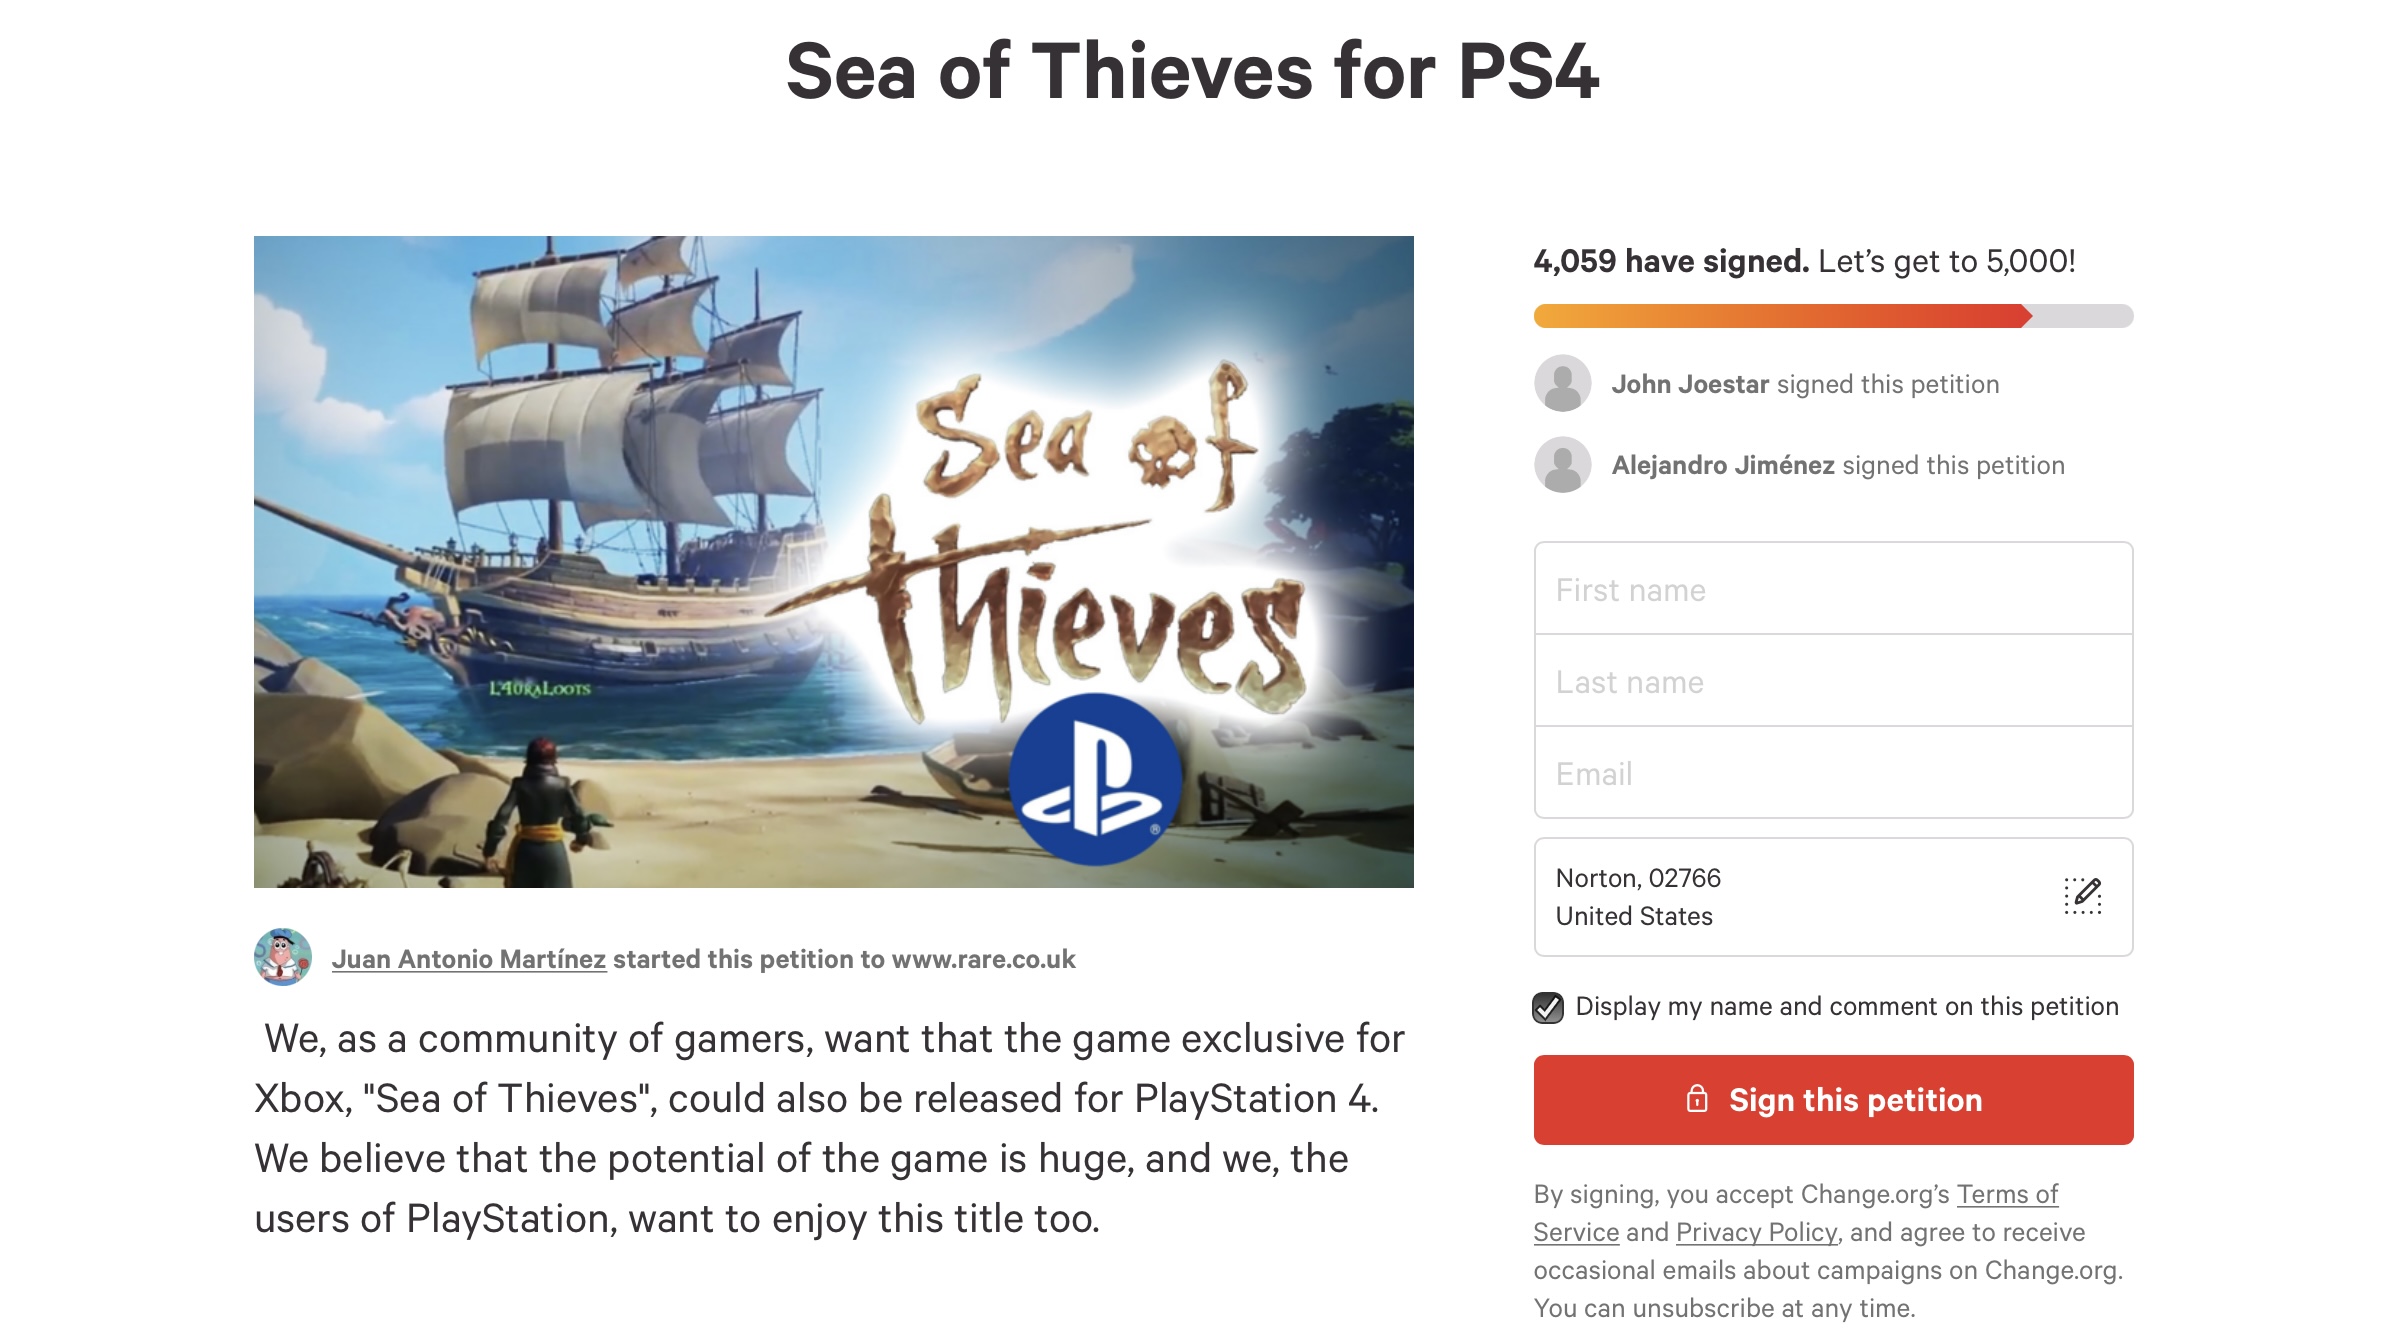 Sea of thieves ps4. Диск Sea of Thieves на ps4. Sea of Thieves на пс4. Море воров на ПС 4. Сколько стоит Sea of Thieves на ps4.